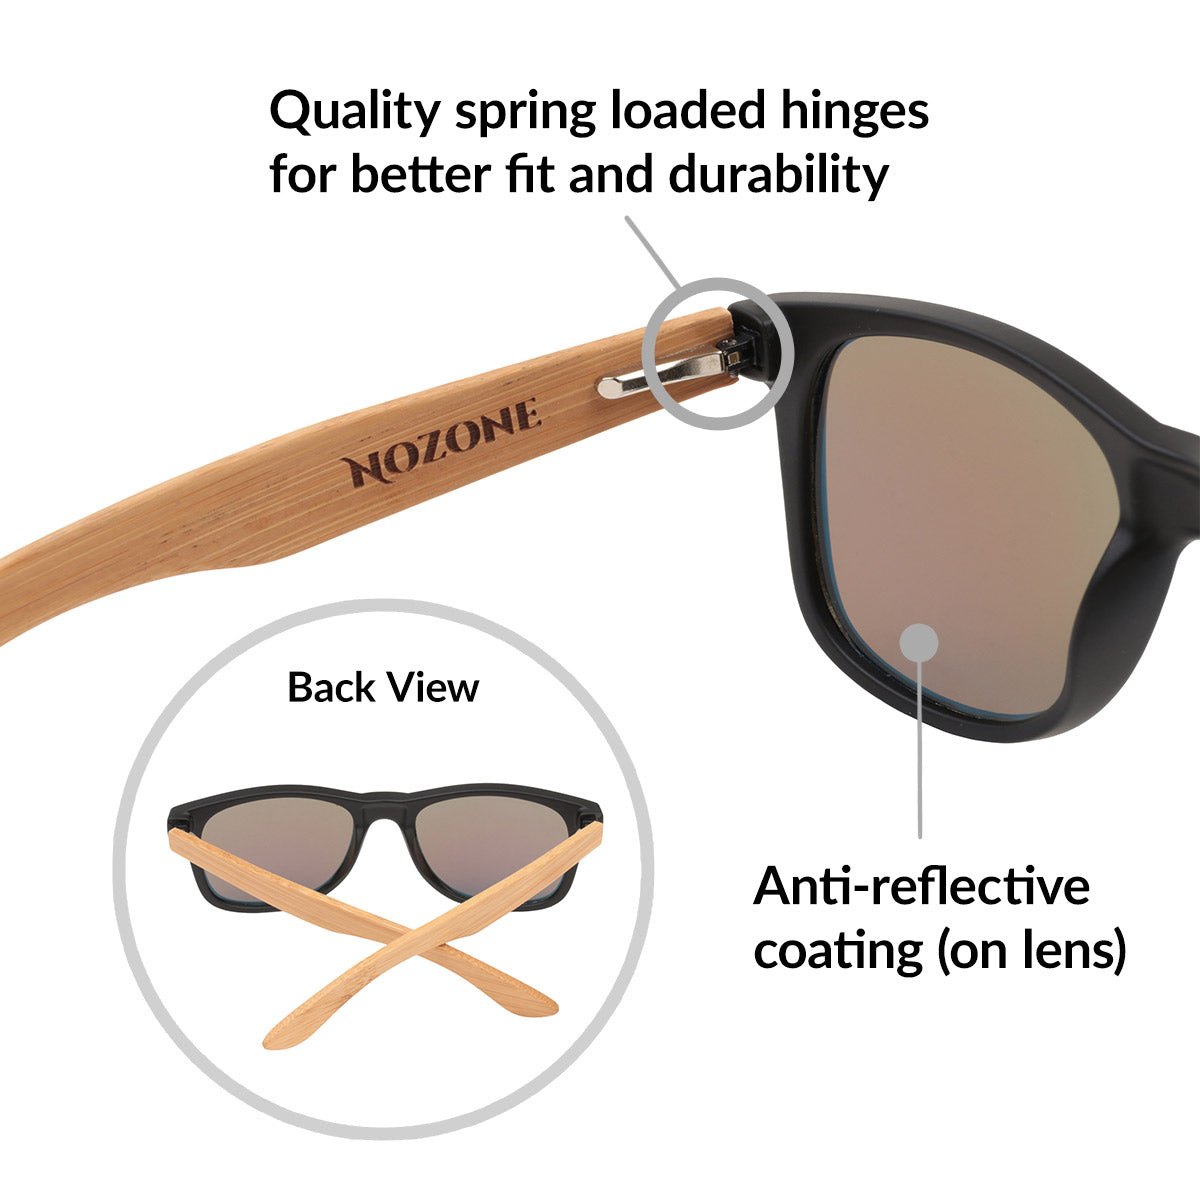 Bamboo/Poly UV400 Polarized Sunglasses for Adults